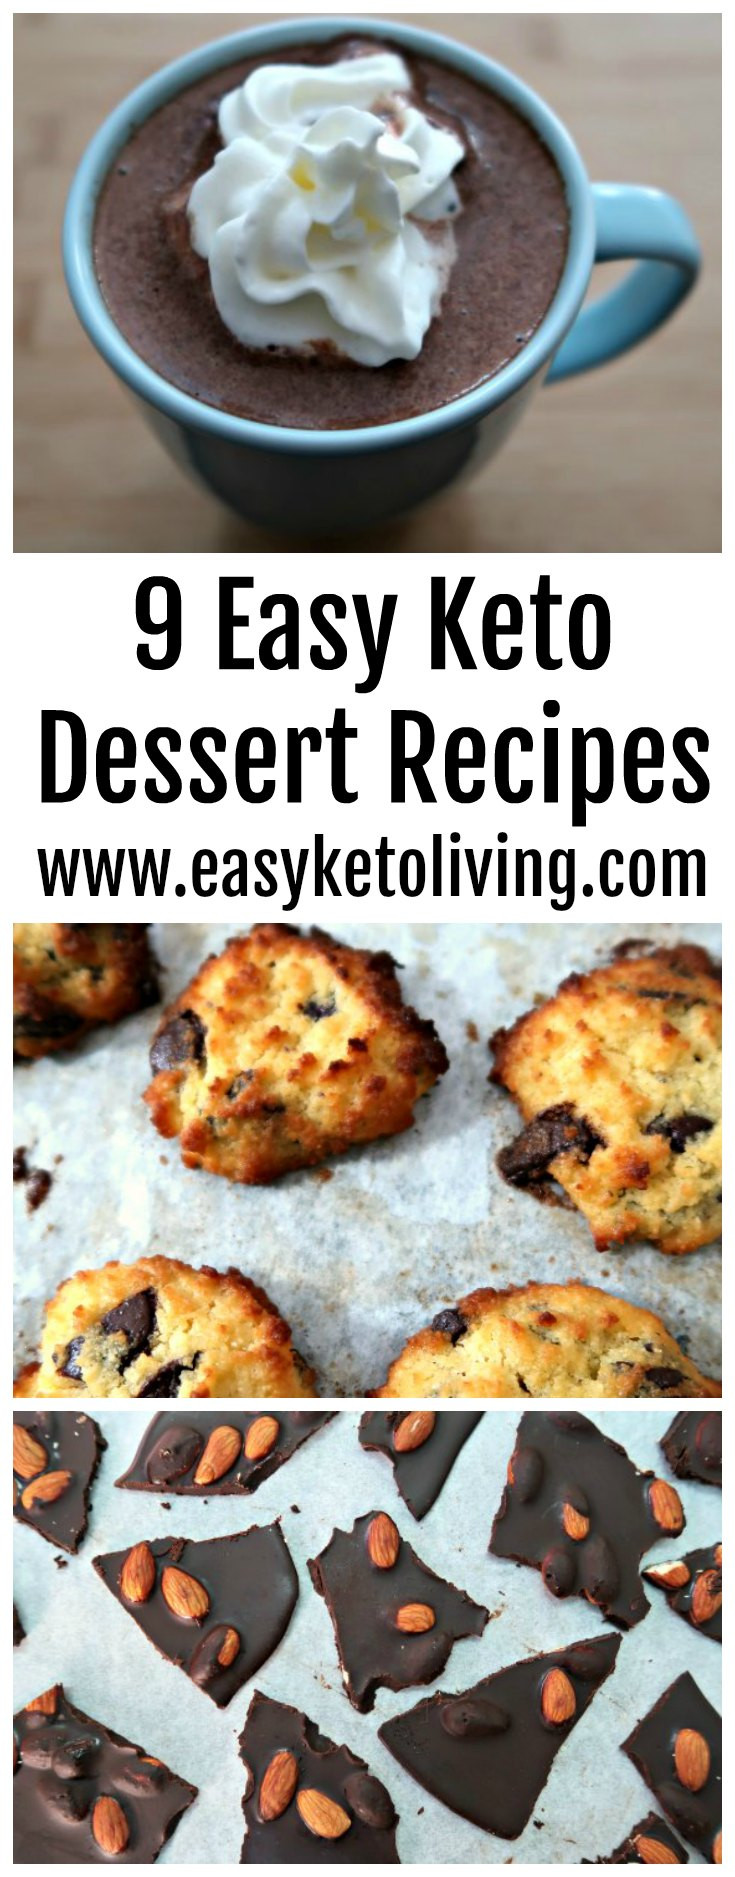 Low Carb Desserts Fast Food
 9 Easy Keto Dessert Recipes Quick Low Carb Ketogenic